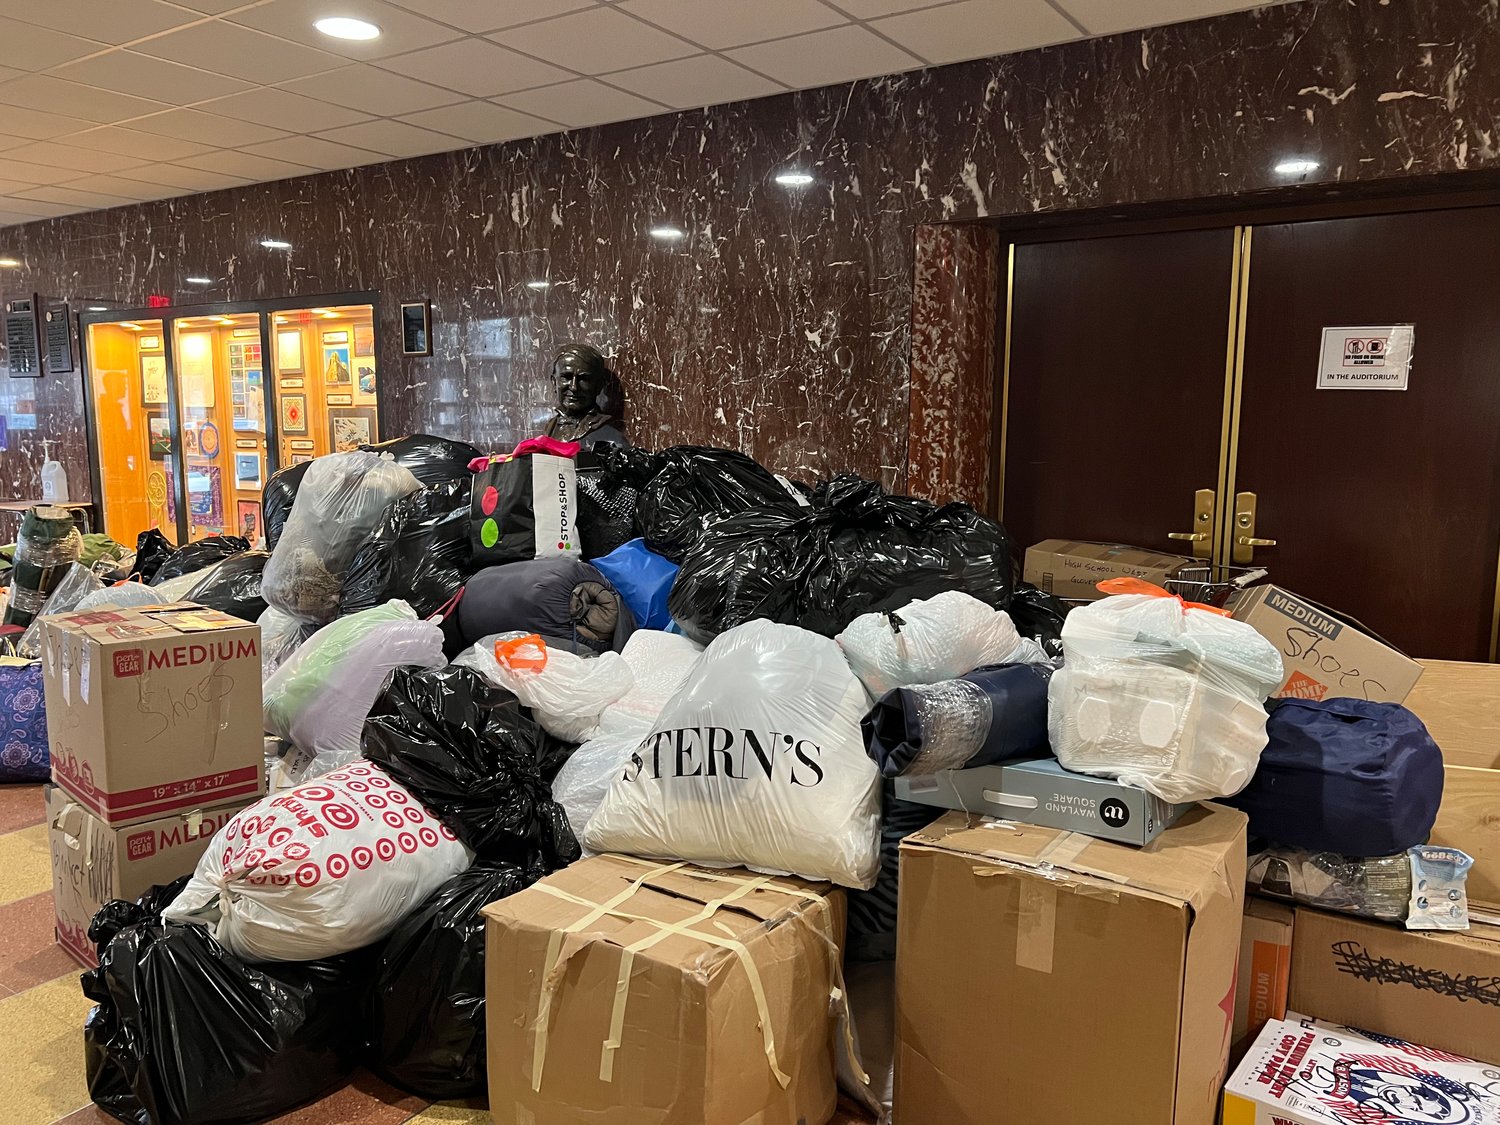 Hundreds of donations were collected from Feb. 10 to 15. Most of the items were clothes, toiletries and shoes for those of all ages.